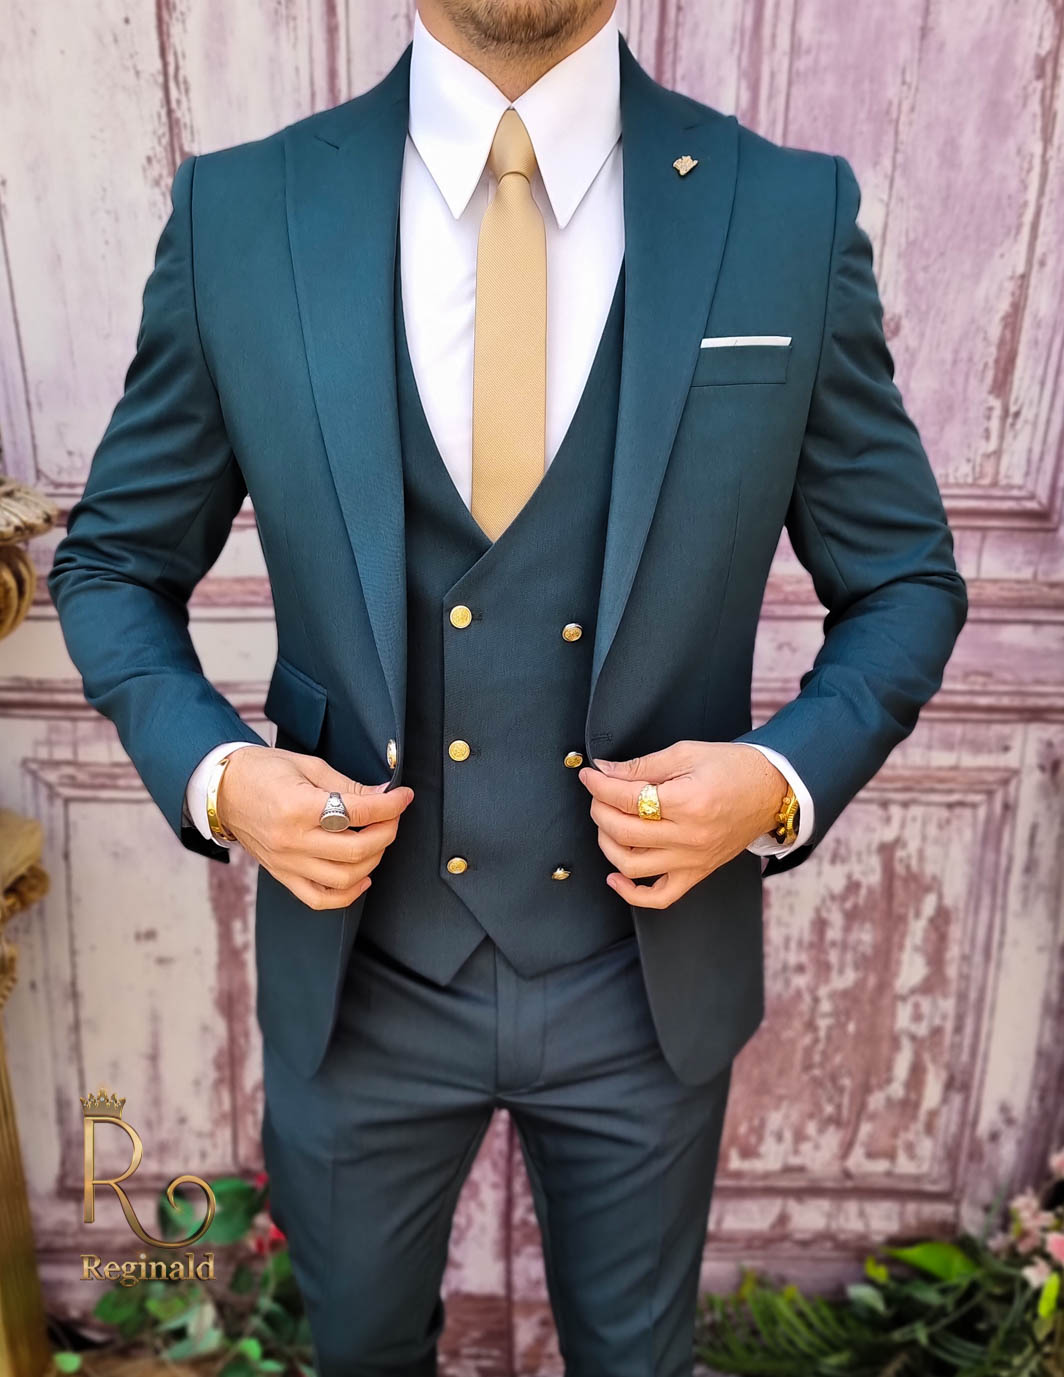 Jacket And Pants Set Slim Fit Casual Business Mens Lavender Wedding Tuxedos  Suit With Peak Fit From Prommall, $163.71 | DHgate.Com